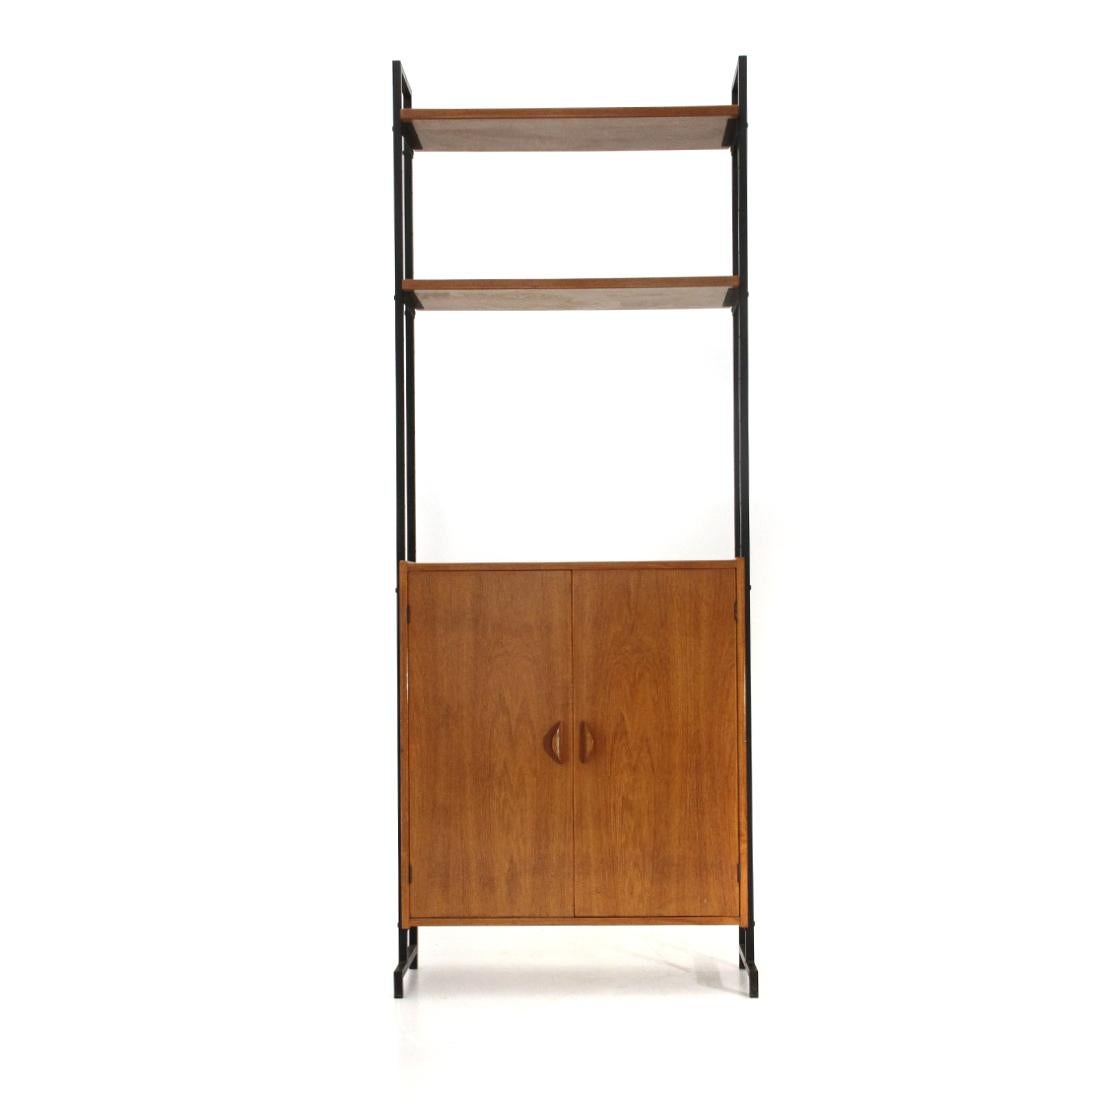 Italian-made bookcase produced in the 1960s.
Uprights in black painted metal.
Shelves and storage compartment in veneered wood.
Storage compartment with two internal shelves.
Handles in shaped wood.
Good general condition, some signs due to